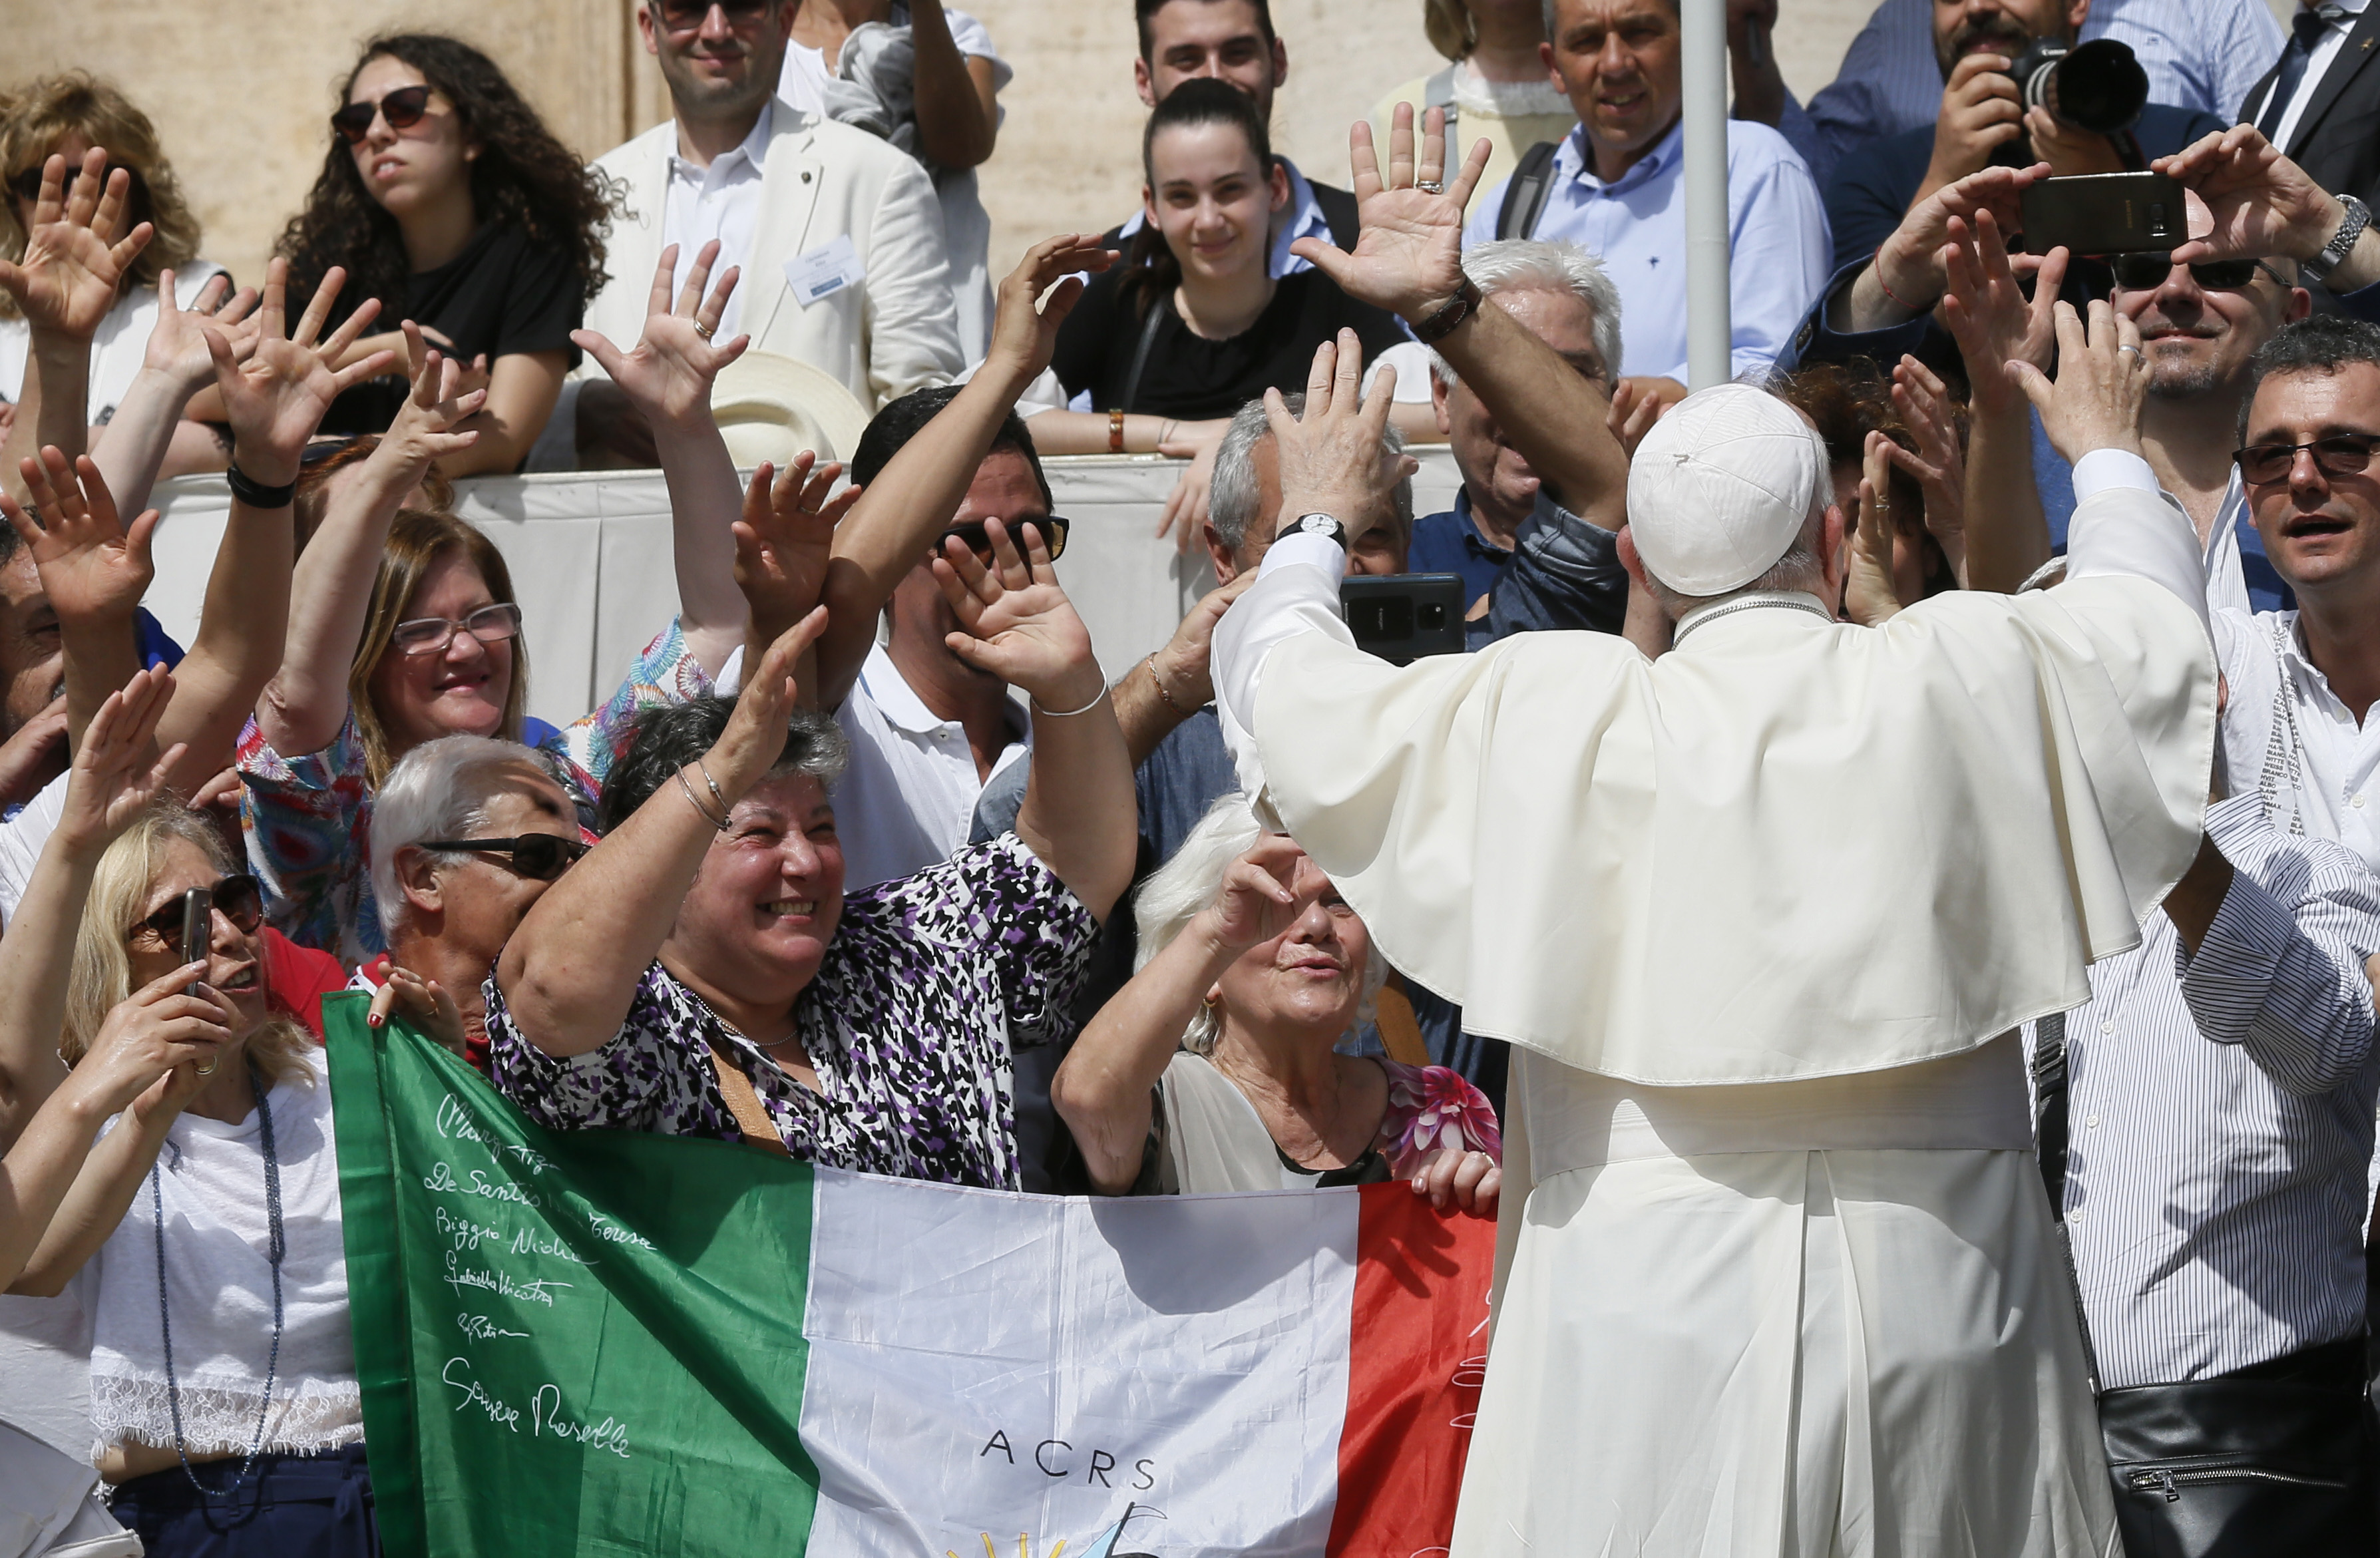 Unity is first sign of true Christian witness, pope says